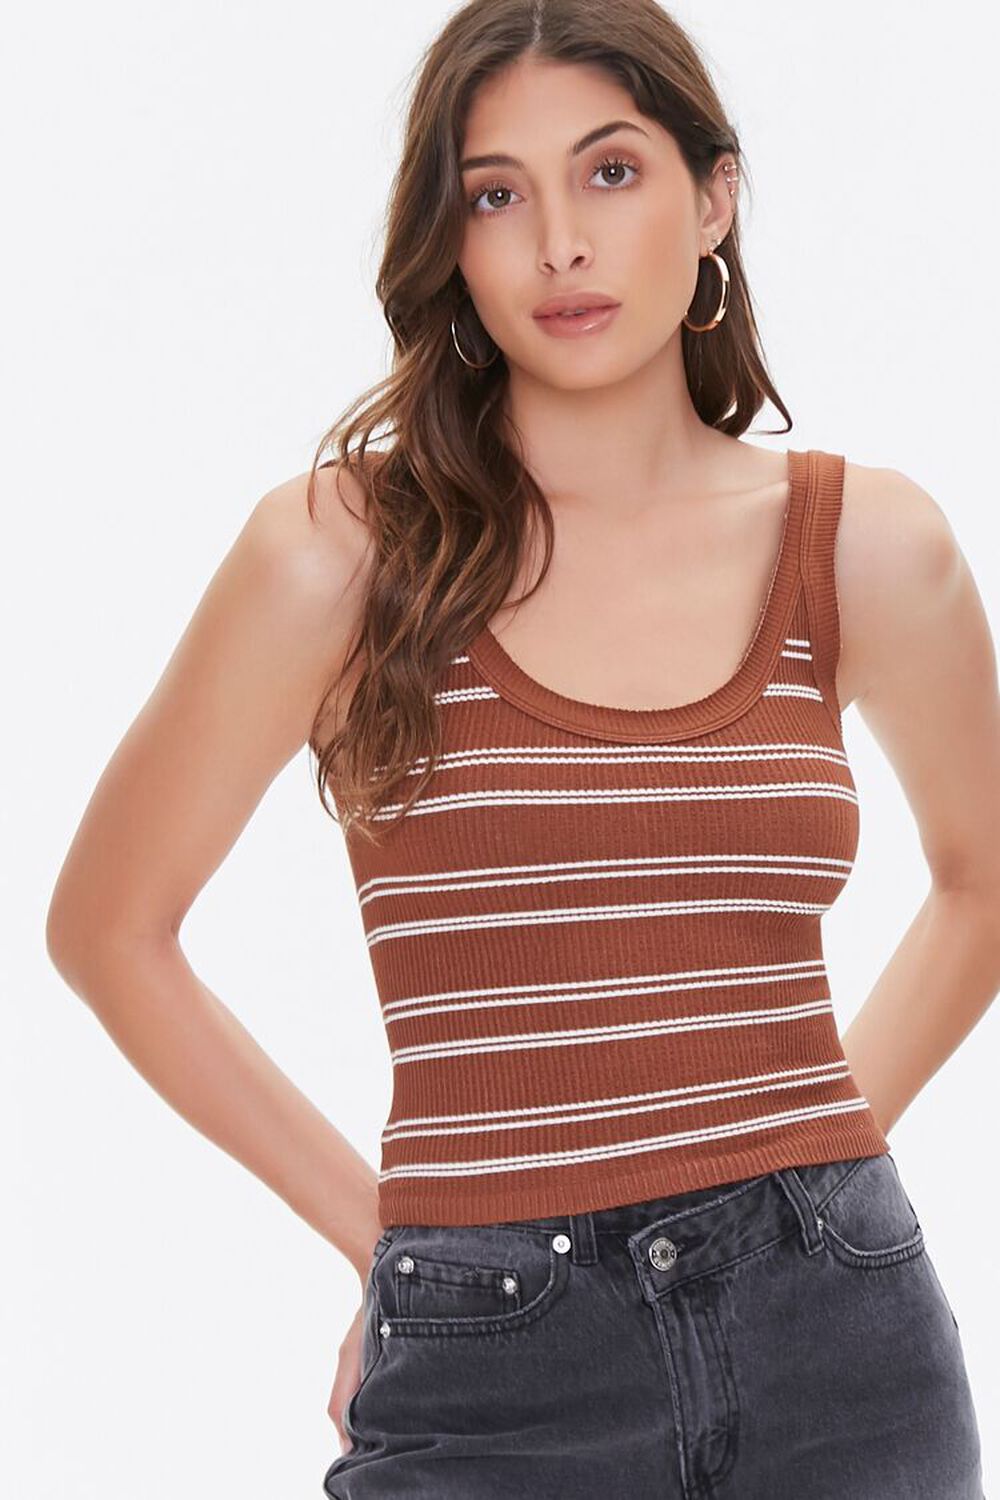 BROWN/CREAM Ribbed Striped Tank Top, image 1